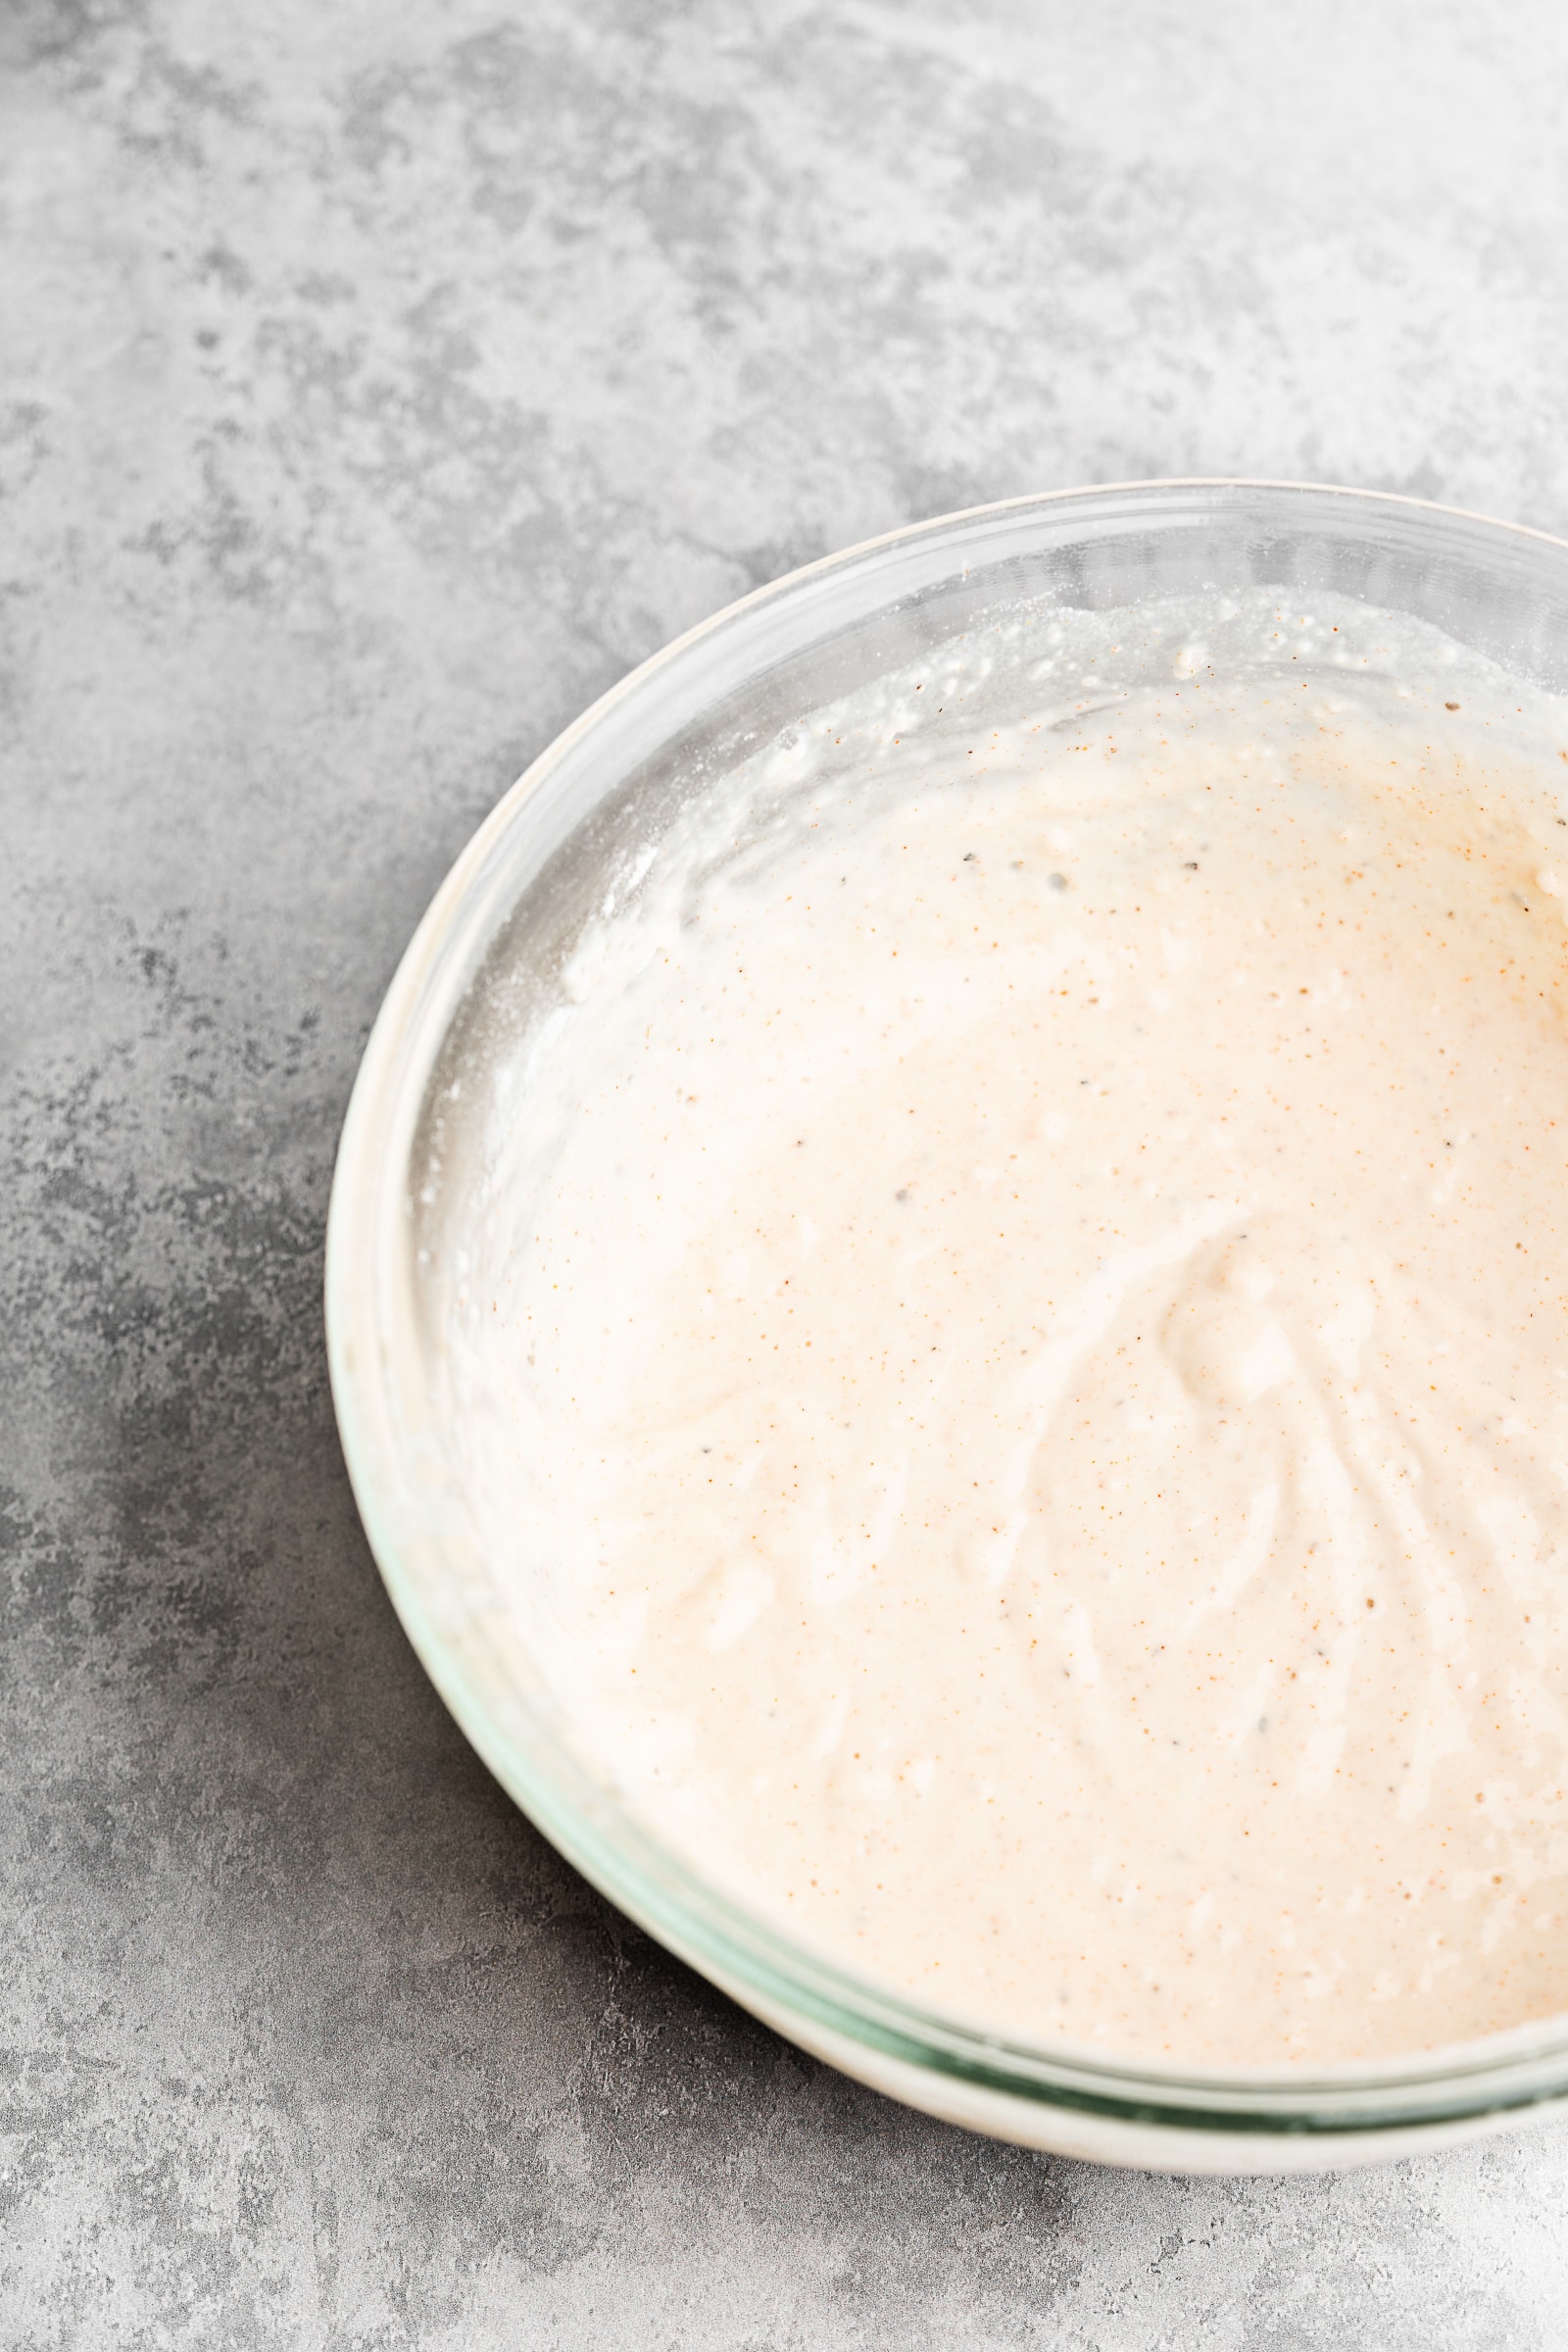 Cauliflower wing batter whisked together.